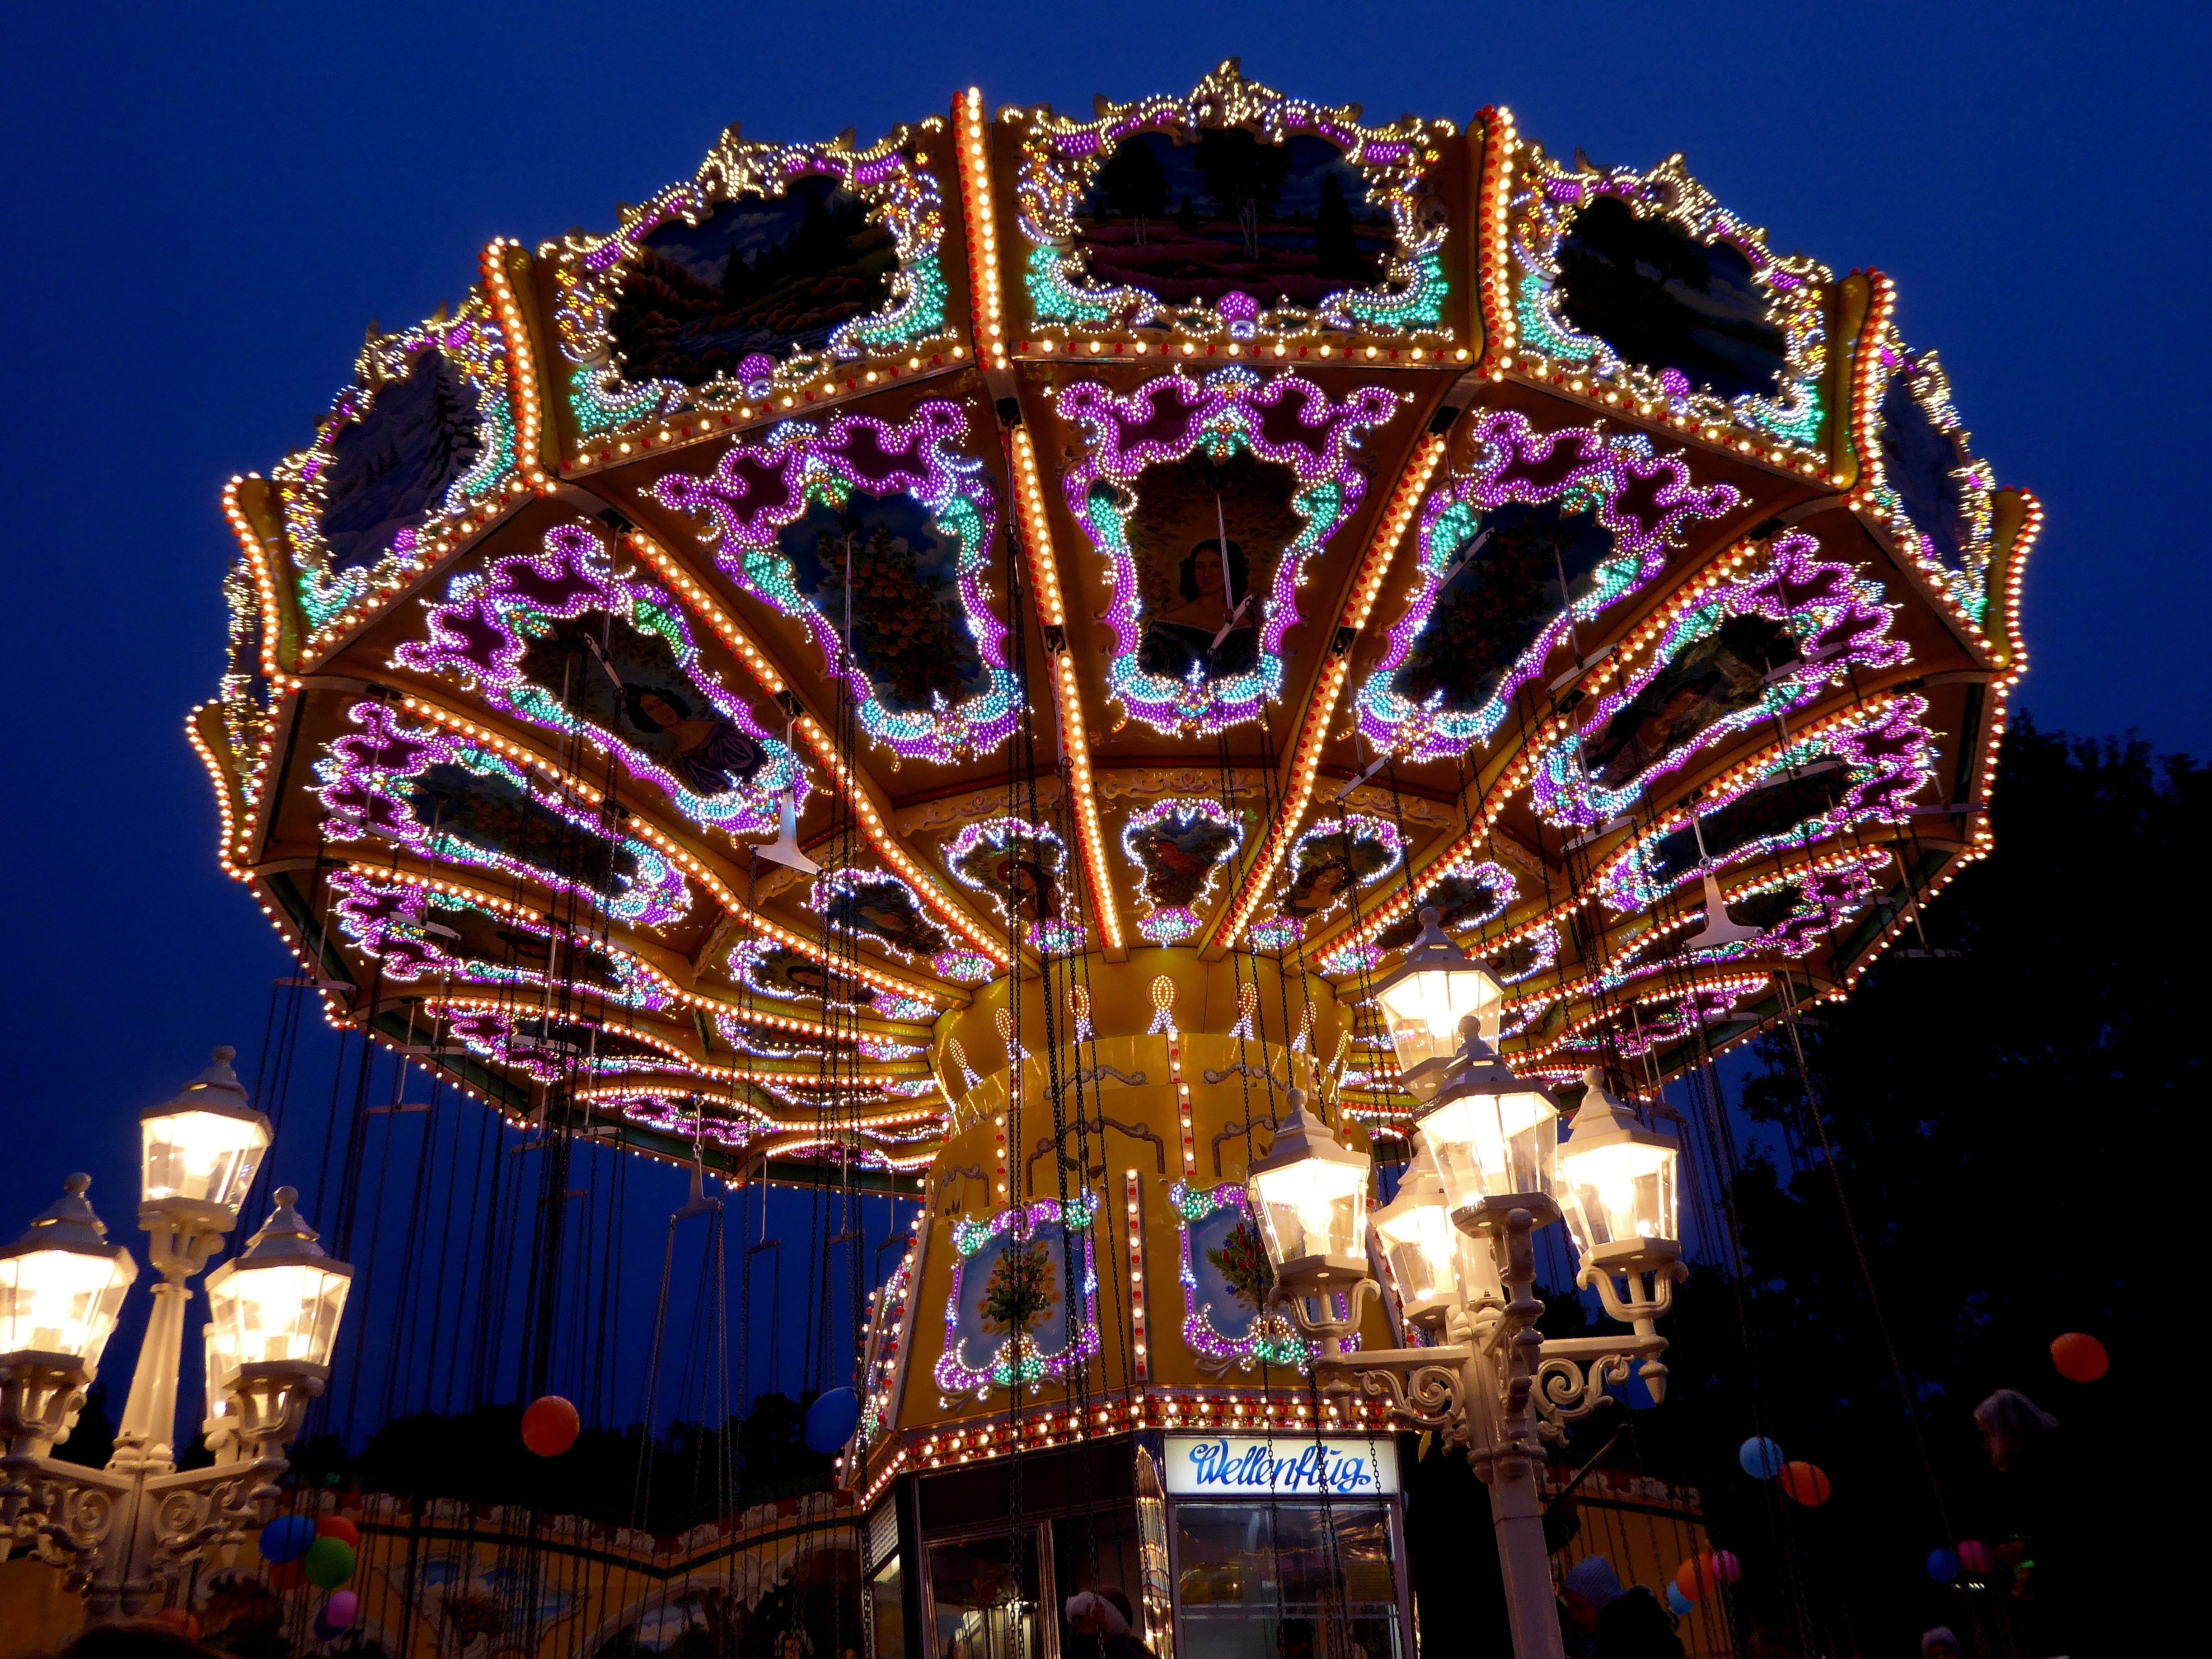 lighted amusement ride during night time